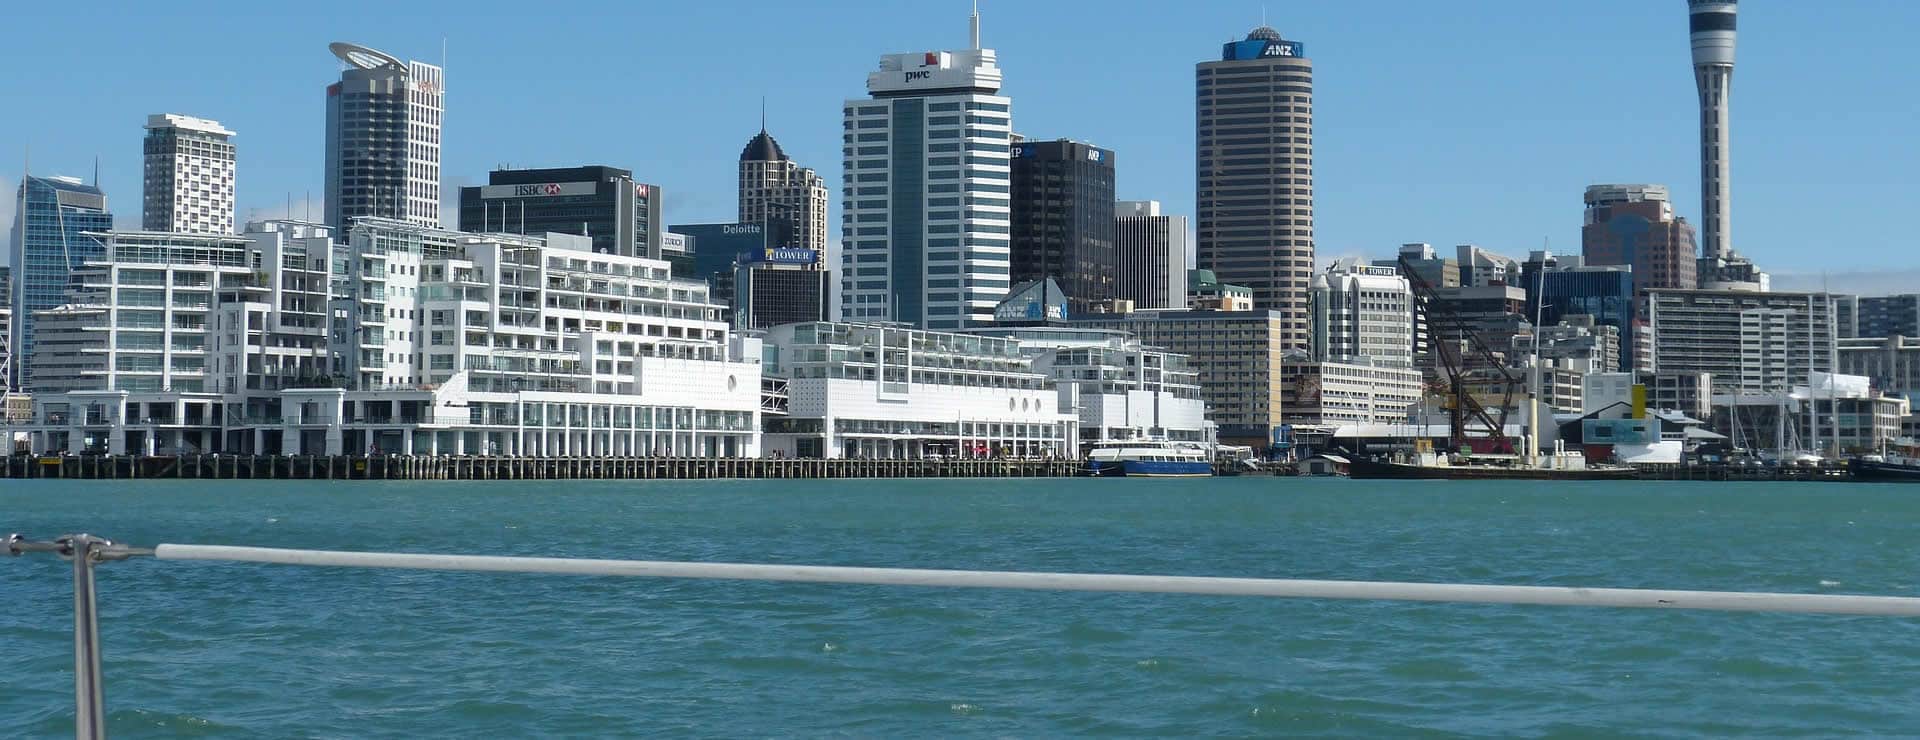 Auckland cruise port and waterfront